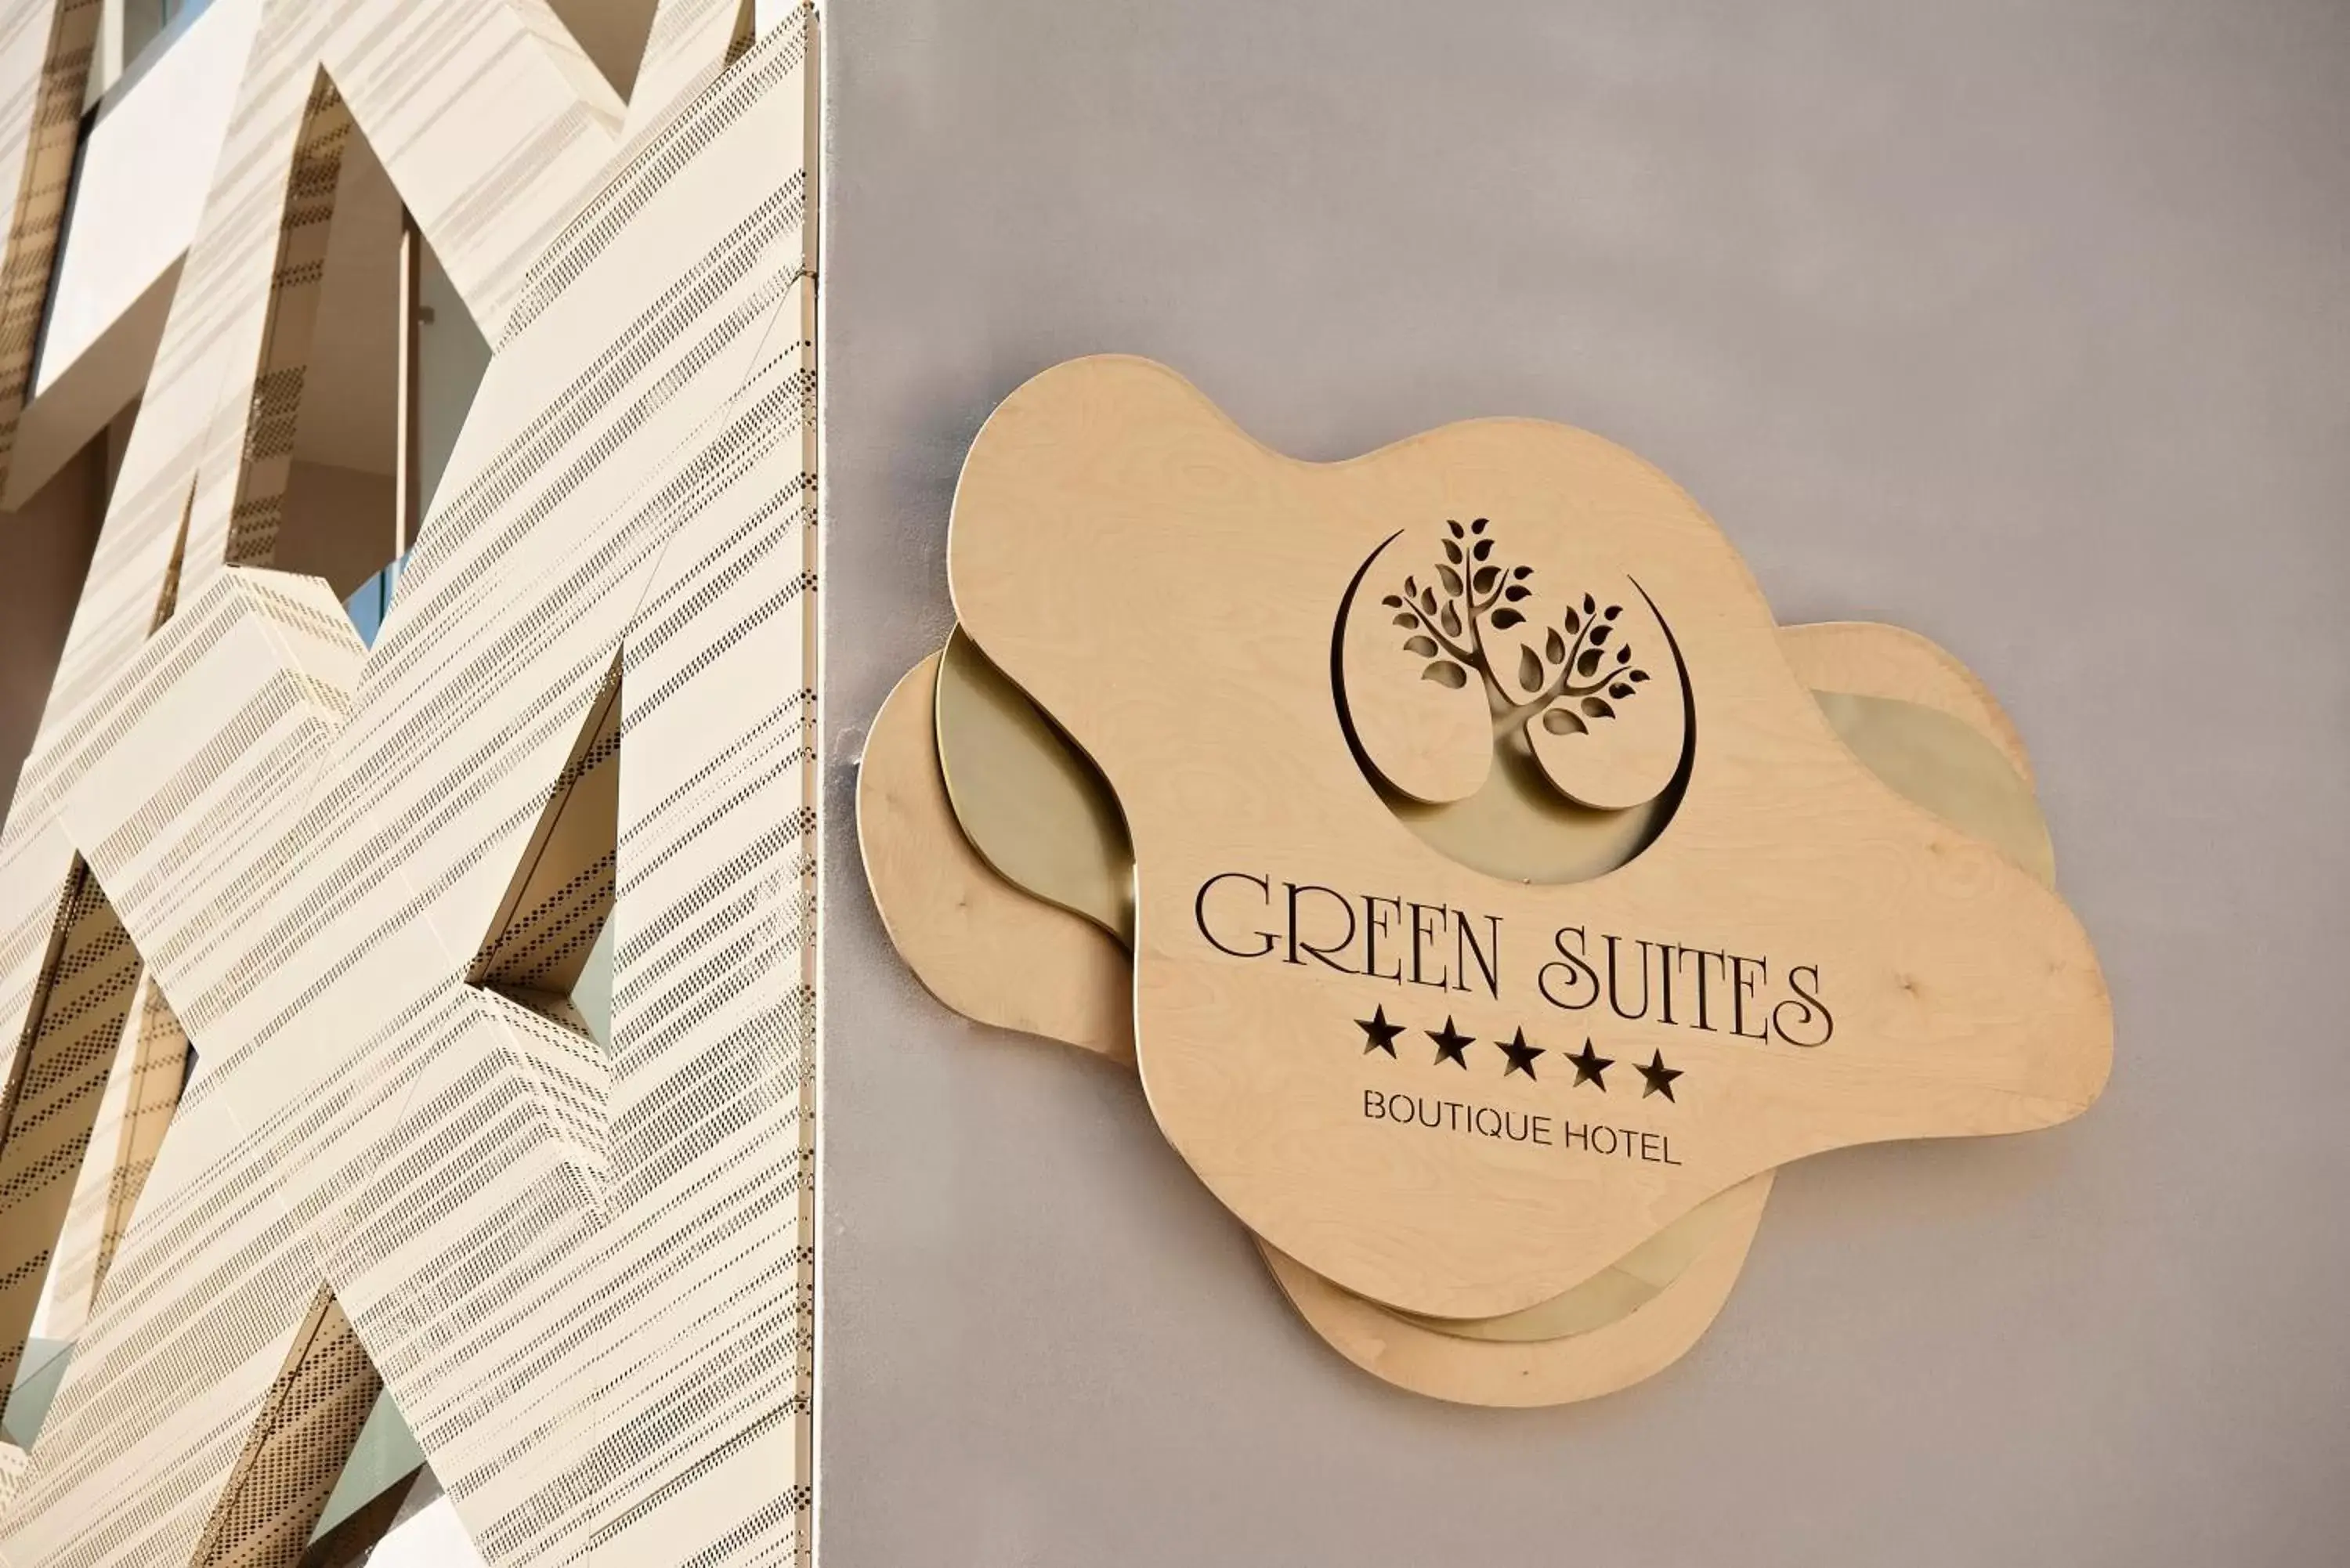 Property logo or sign, Logo/Certificate/Sign/Award in Green Suites Boutique Hotel